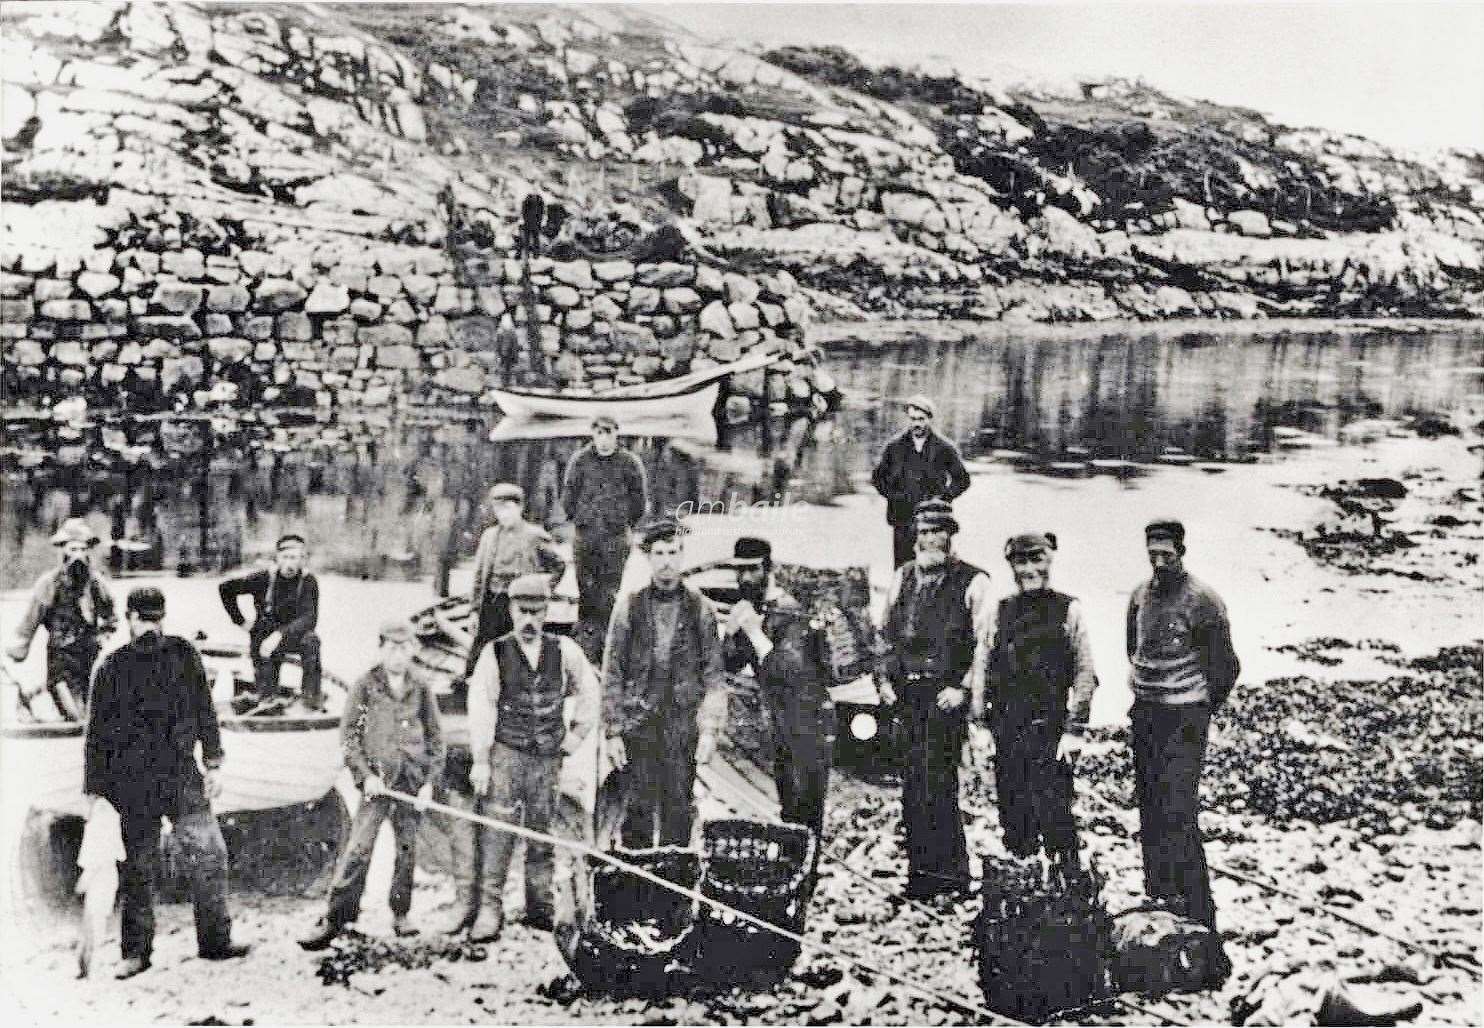 Crofter-fishermen at Rispond, Durness, 1890s, from the collection of Willie Morrison.